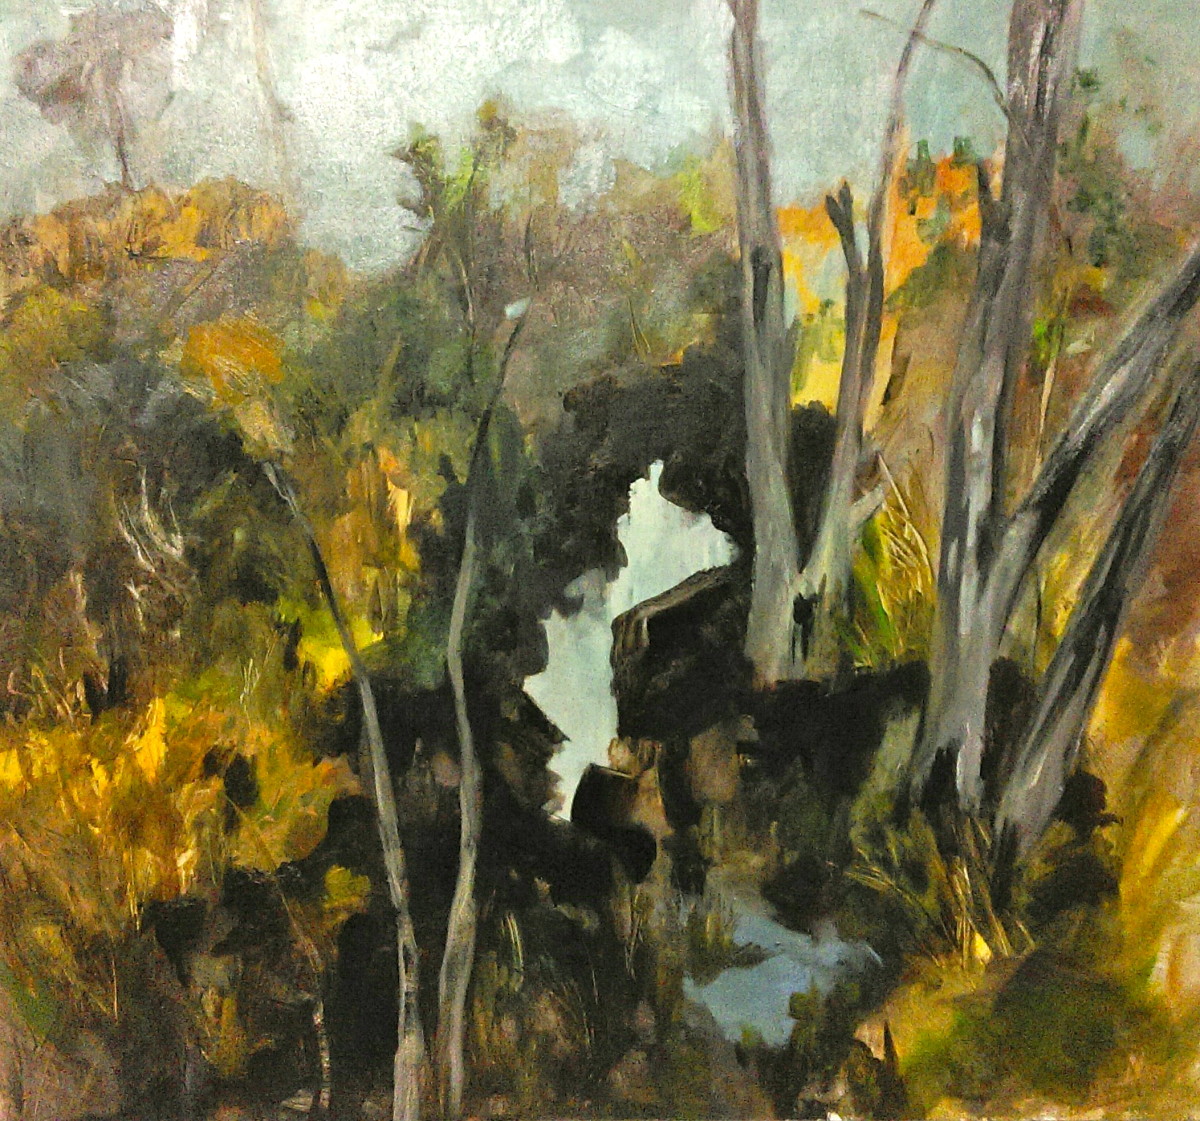 The Wattles are in Flower by Gillian Hughes 